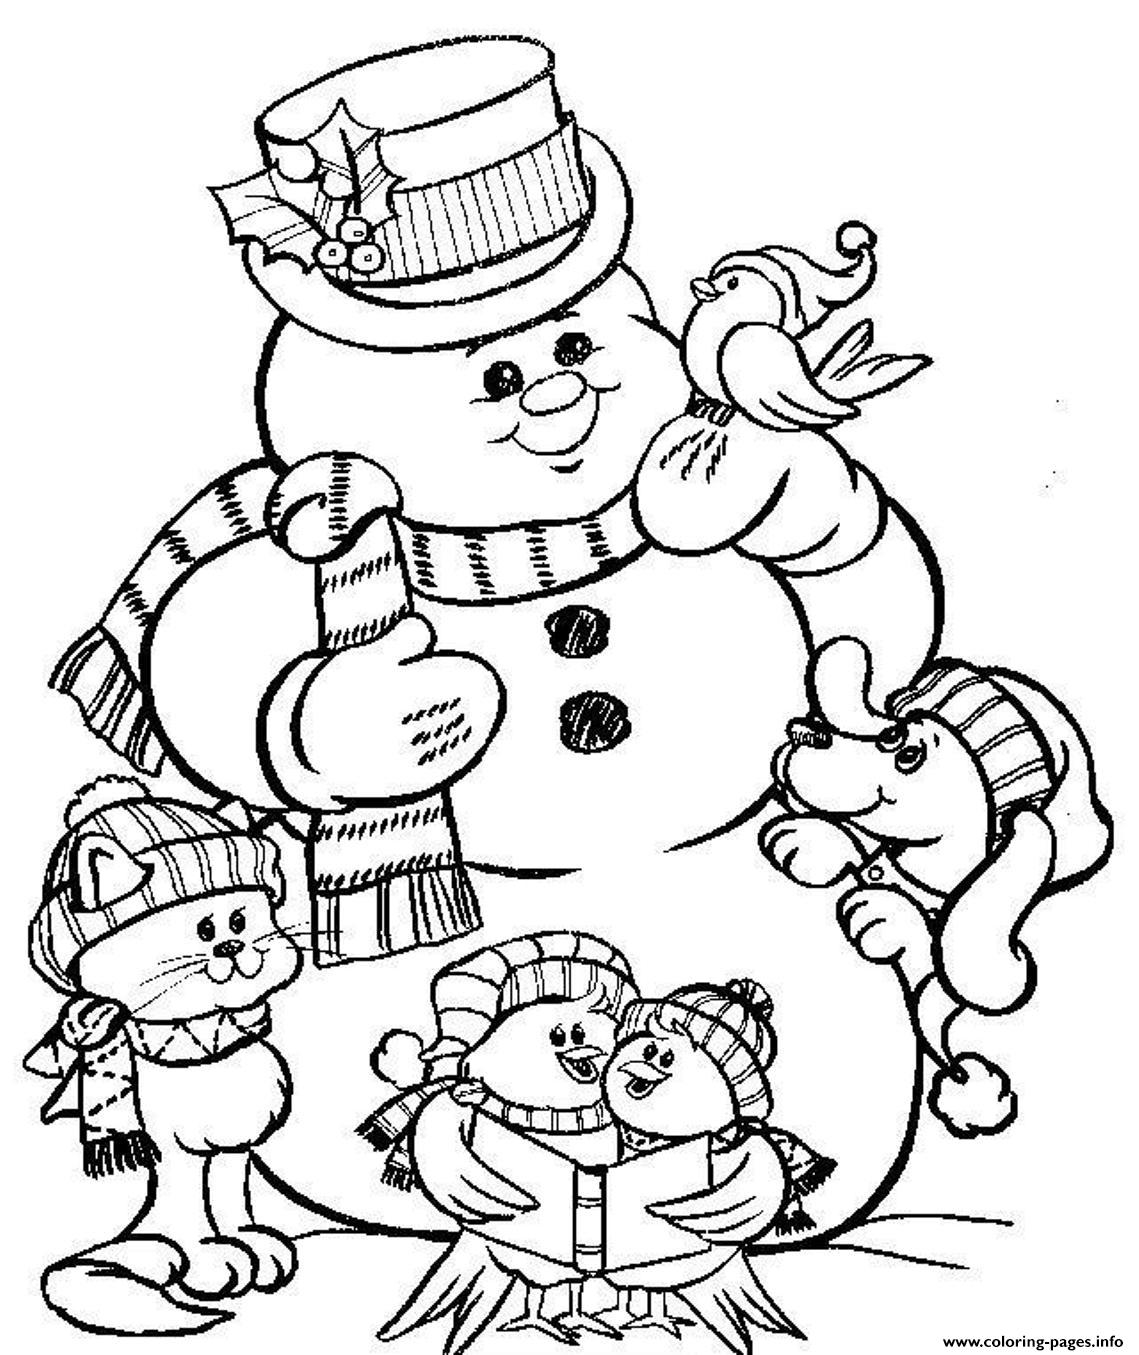 Snowman S To Print For Christmas426a coloring